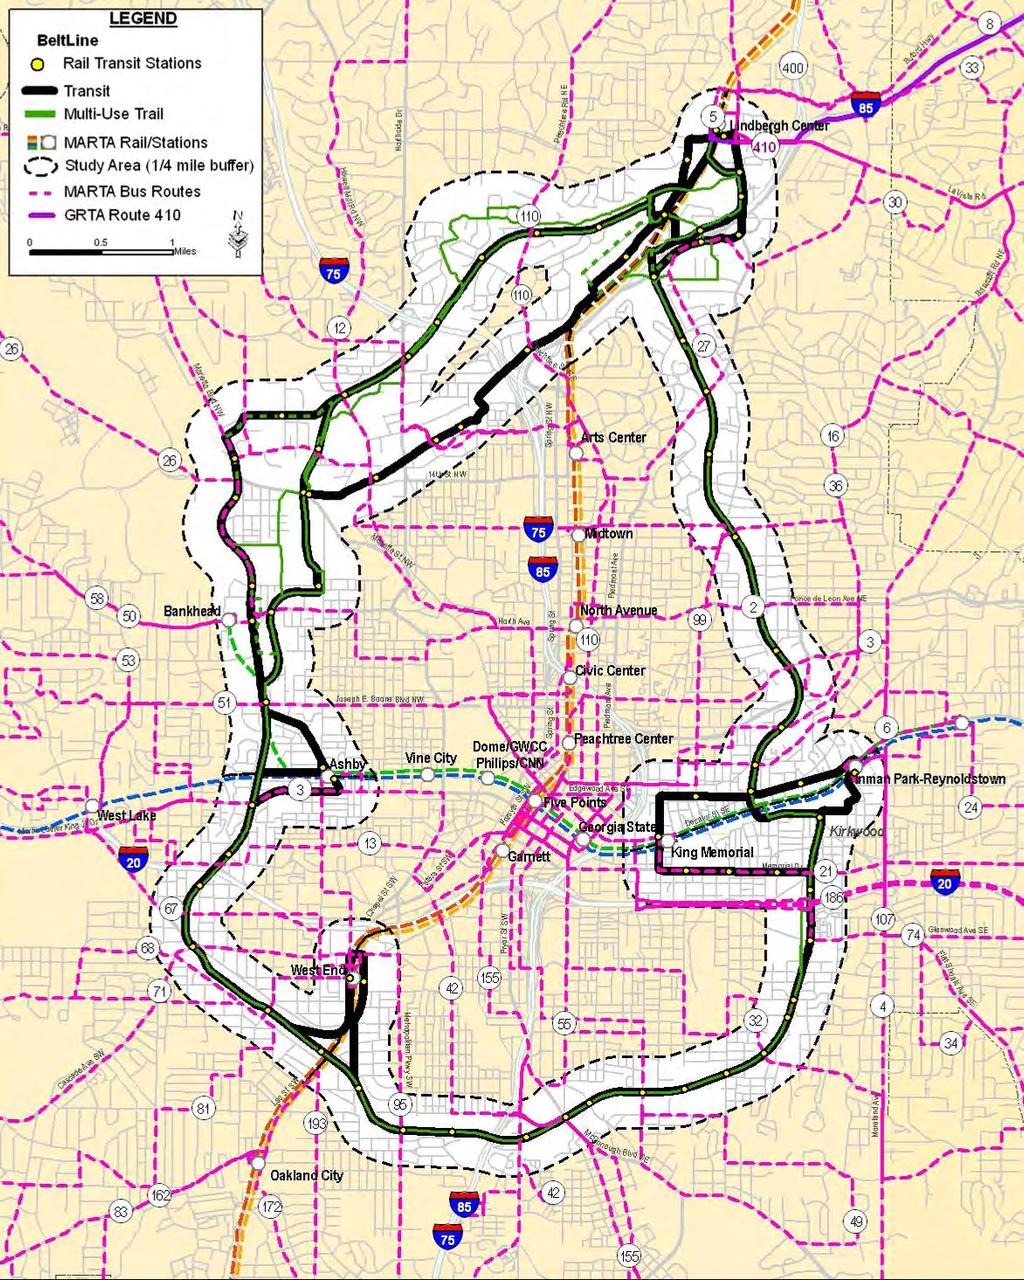 Figure 3-1: Existing Transit Service Source: MARTA, GRTA Note: The Atlanta BeltLine is not considered to be existing transit service, but for